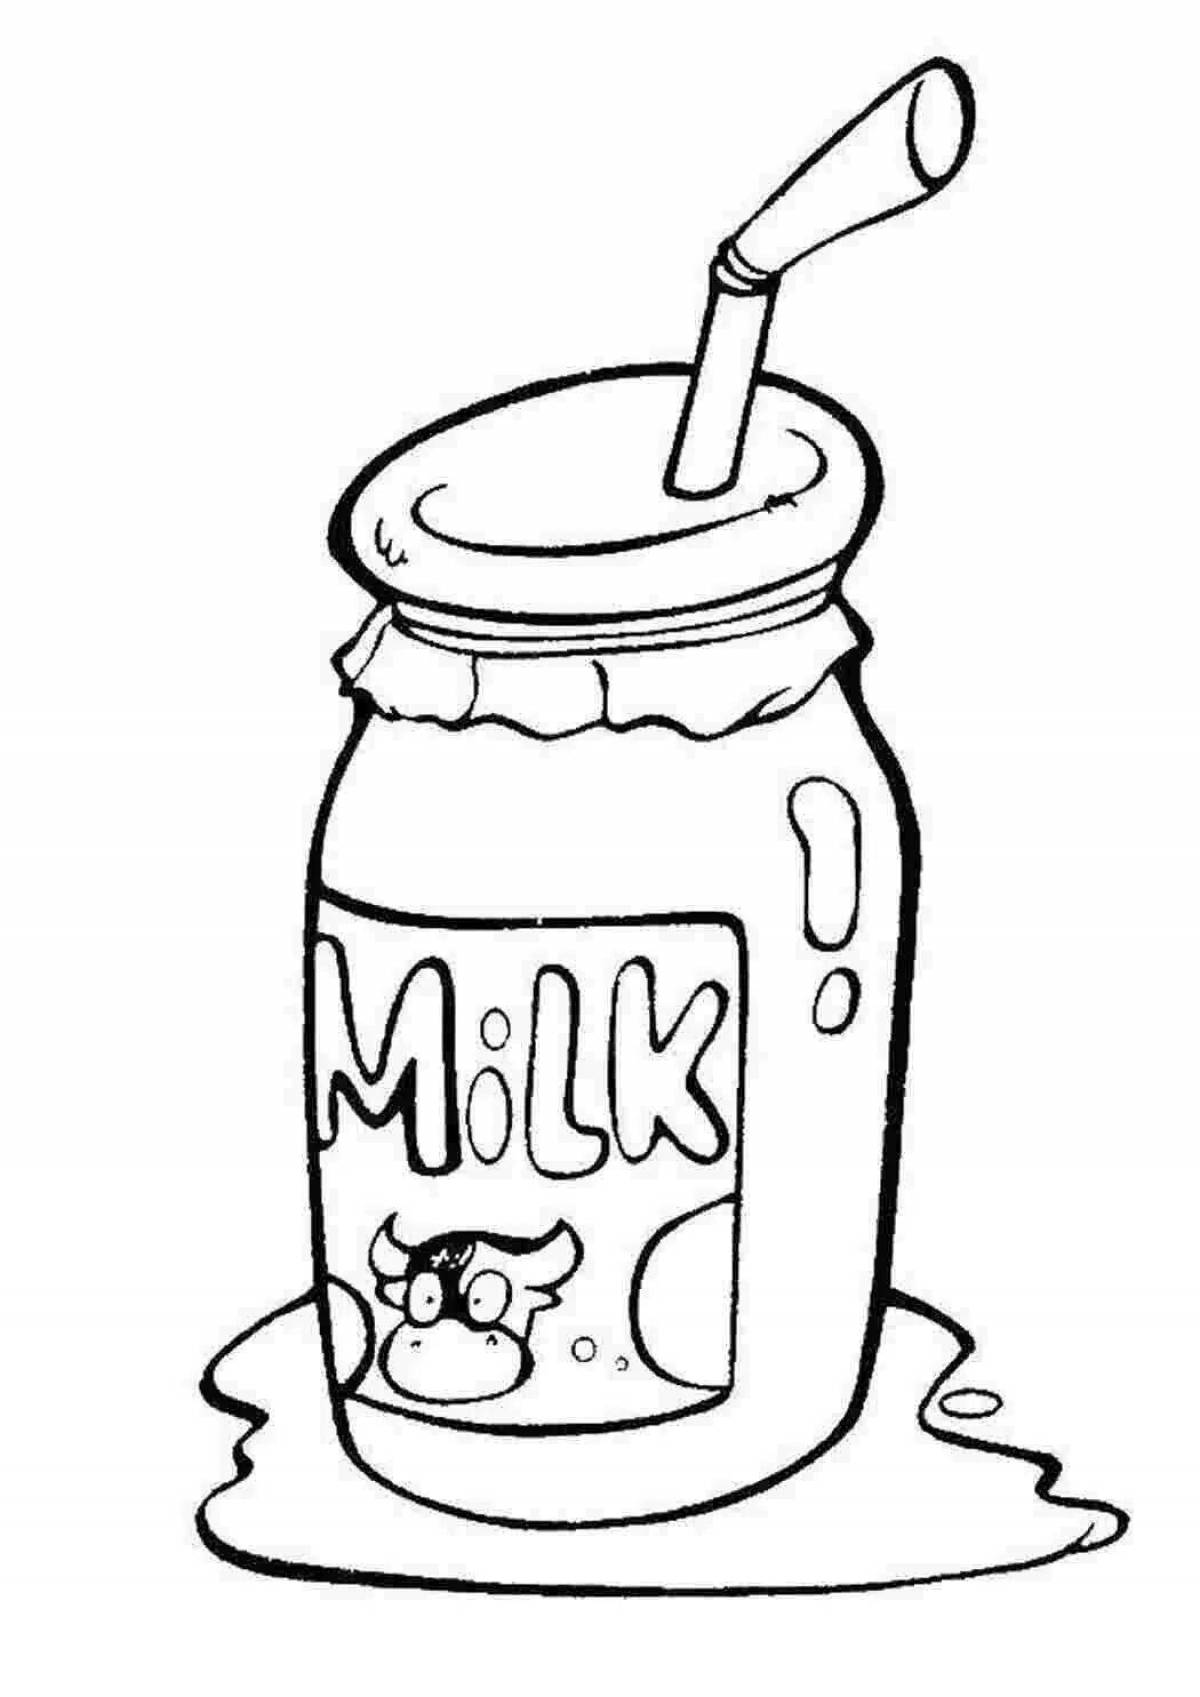 Glorious milk coloring page